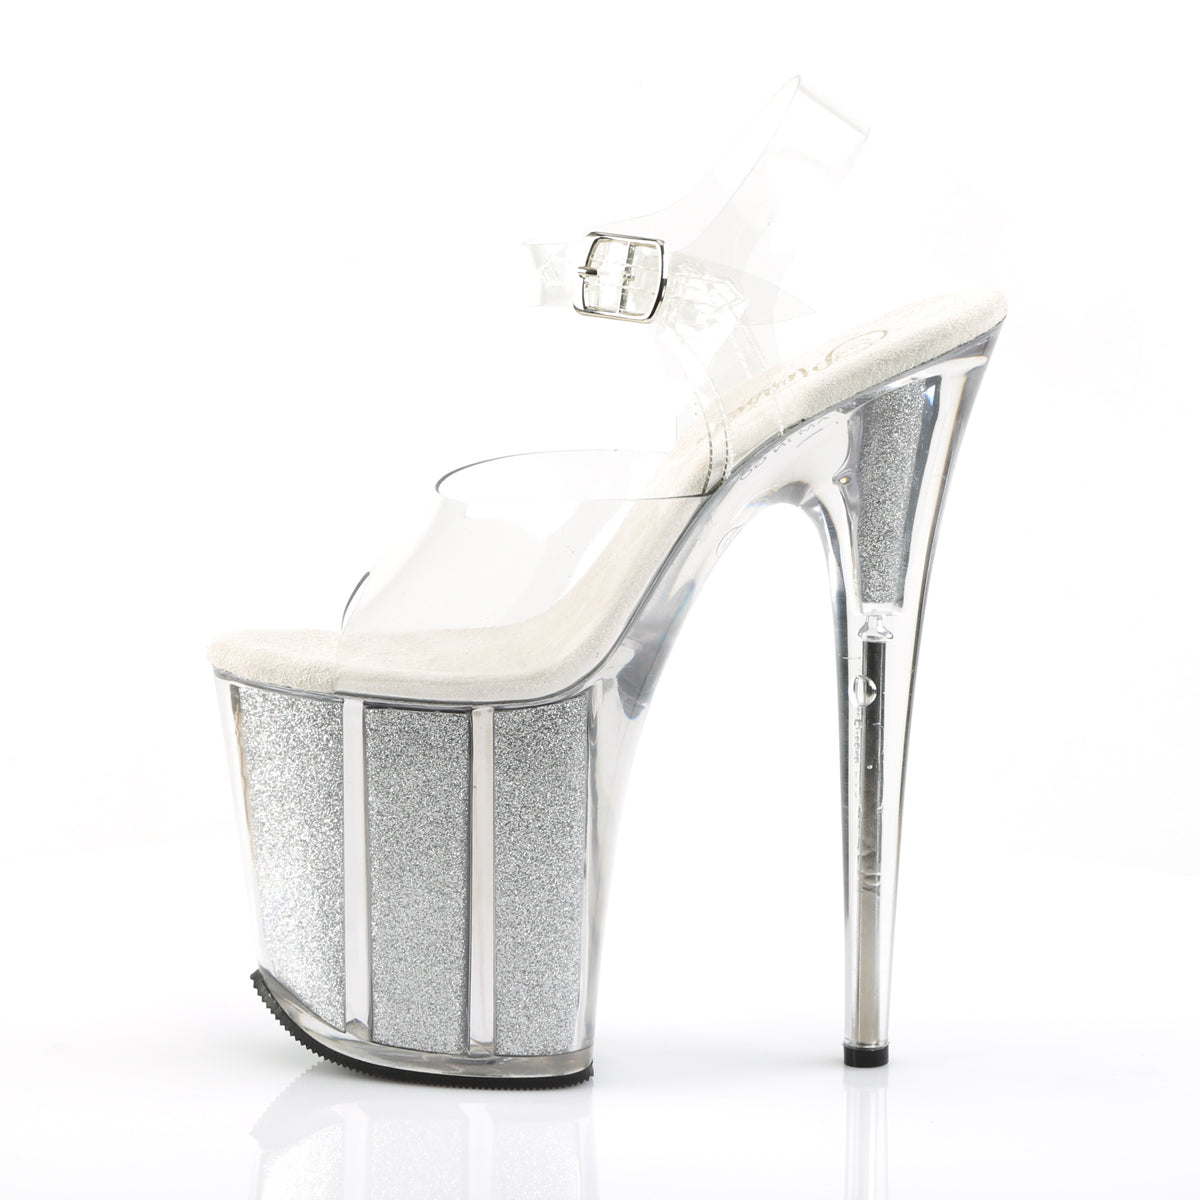 FLAMINGO-808G 8" Heel Clear Silver Glitter Strippers Shoes-Pleaser- Sexy Shoes Pole Dance Heels